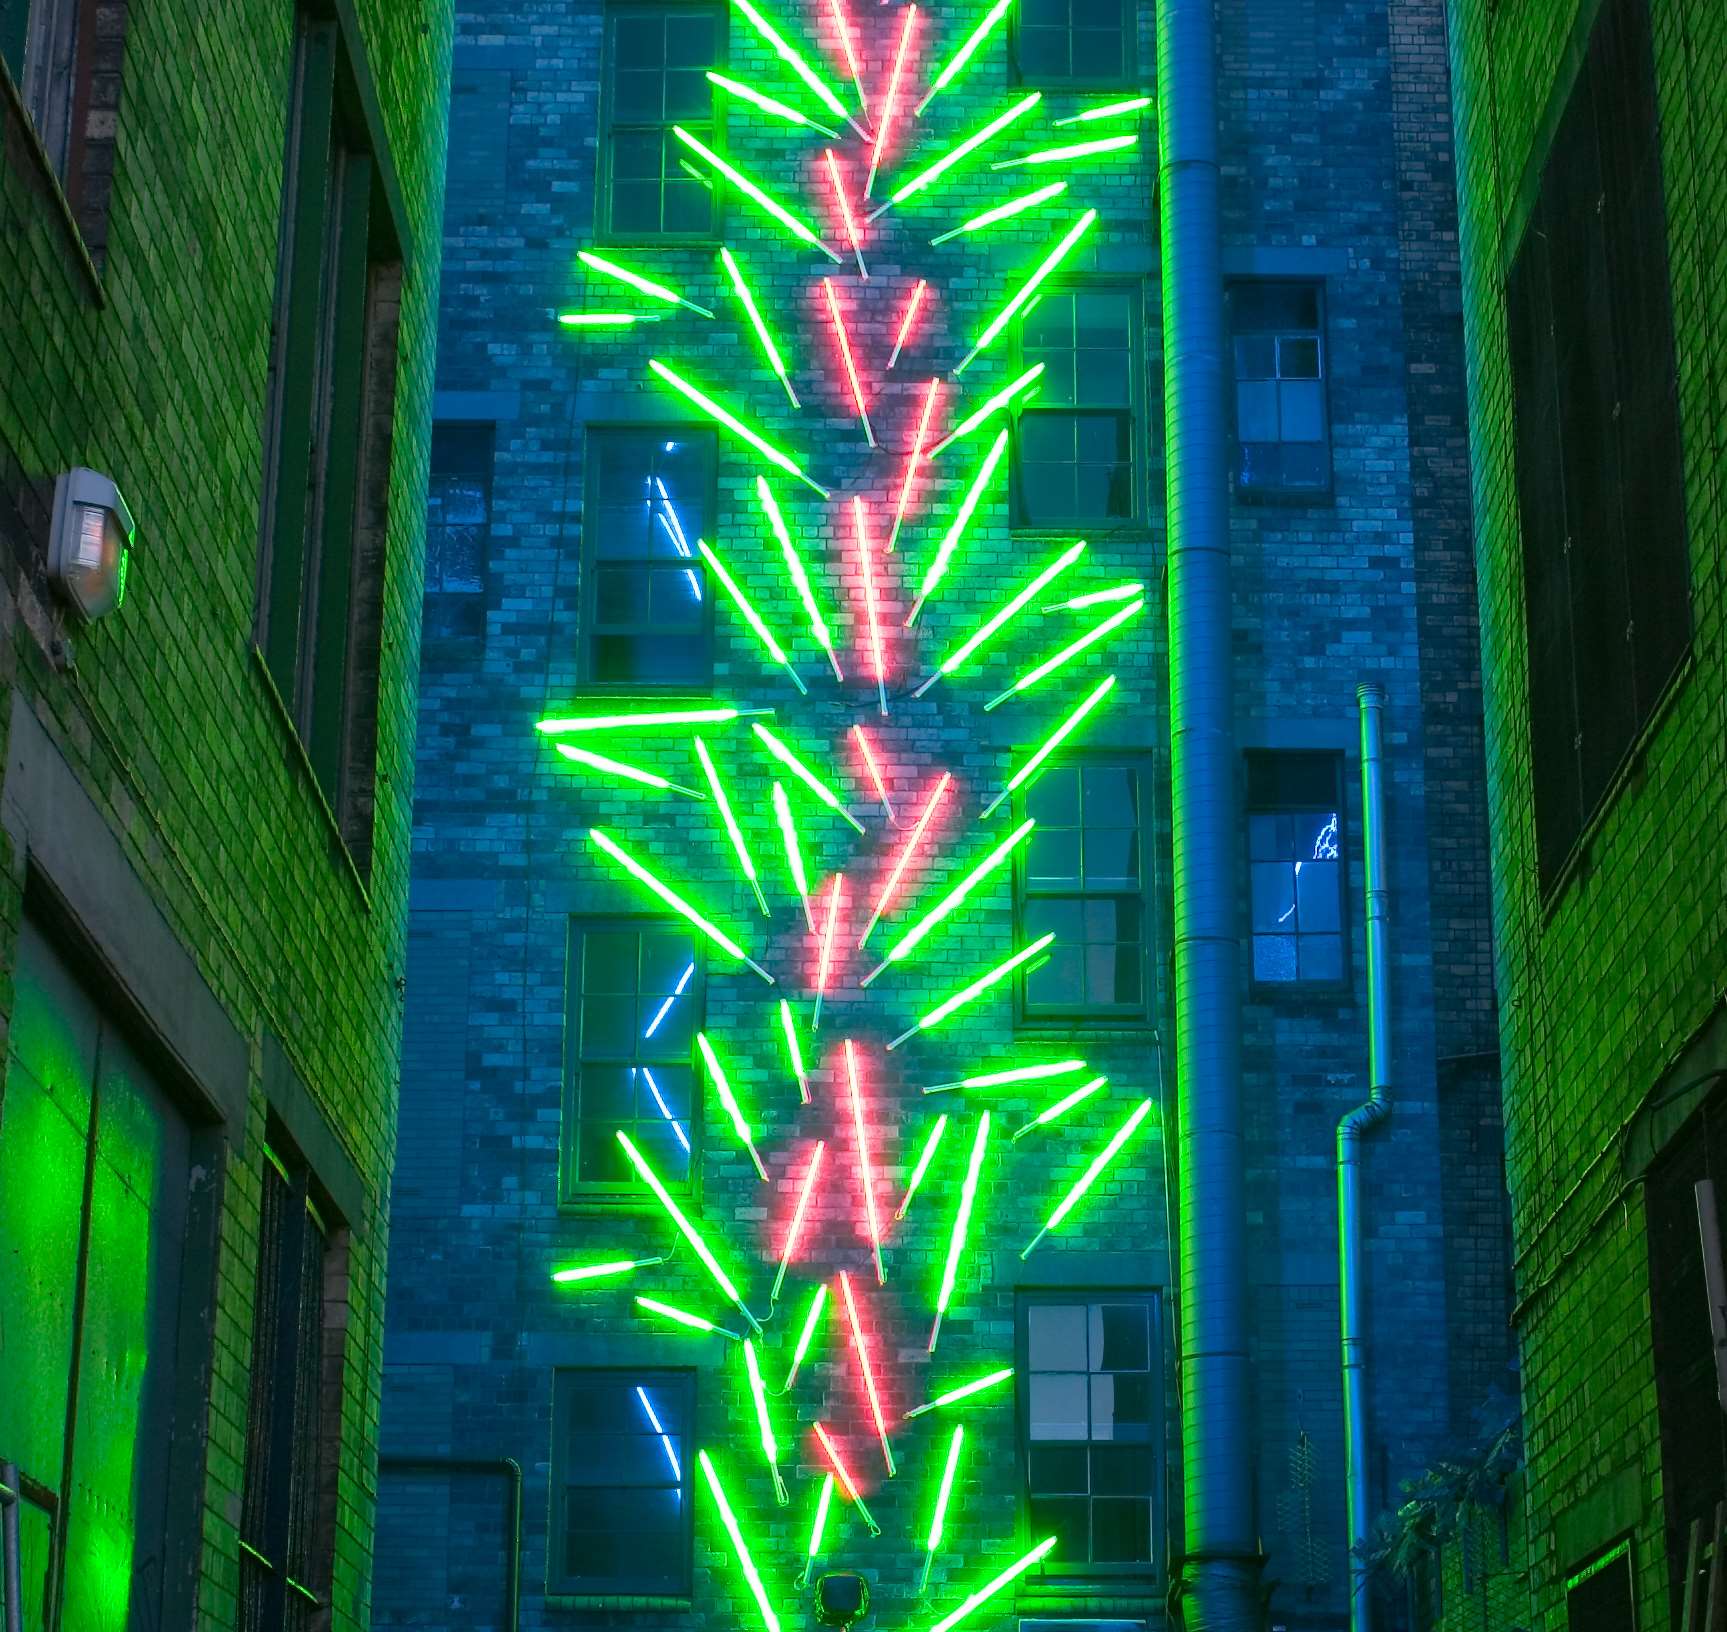 One of the light installations Picture: Simon Corder